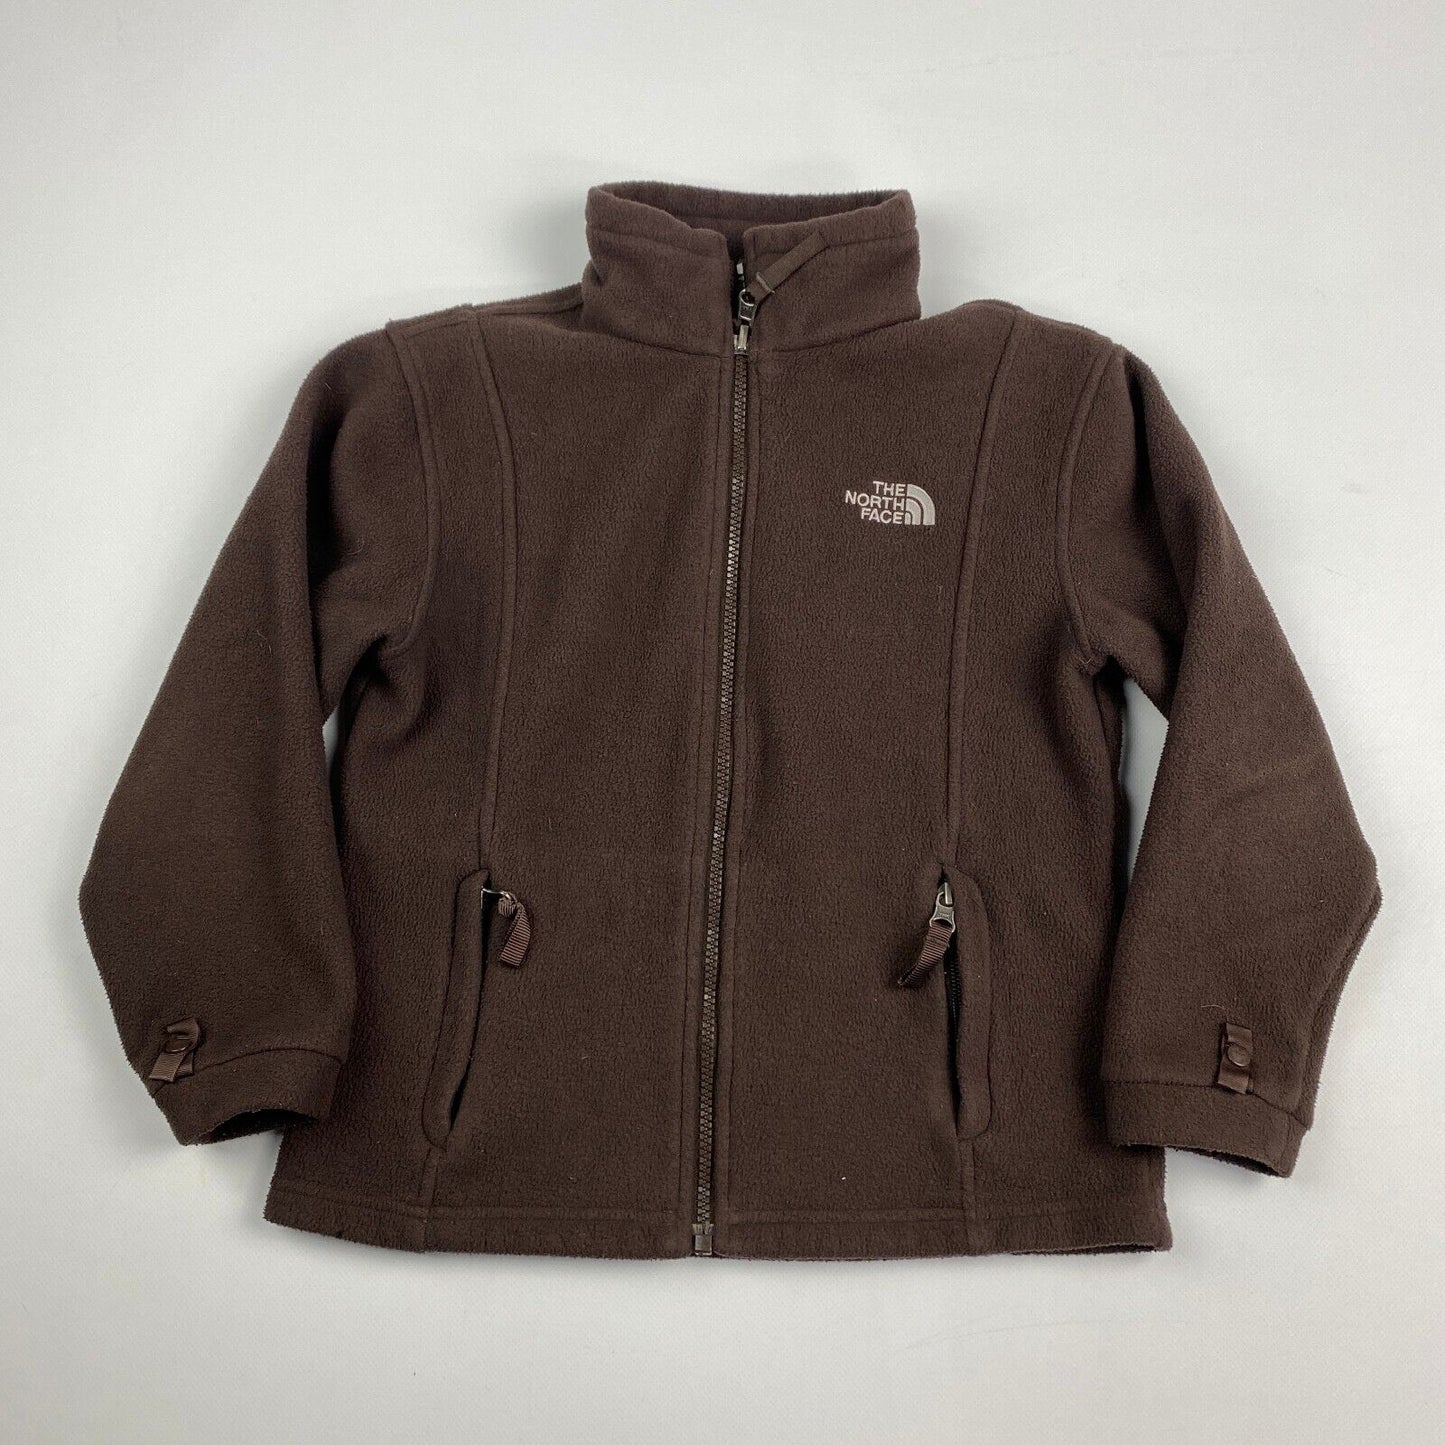 VINTAGE The North Face Brown Fleece Sweater sz Small Girls Youth